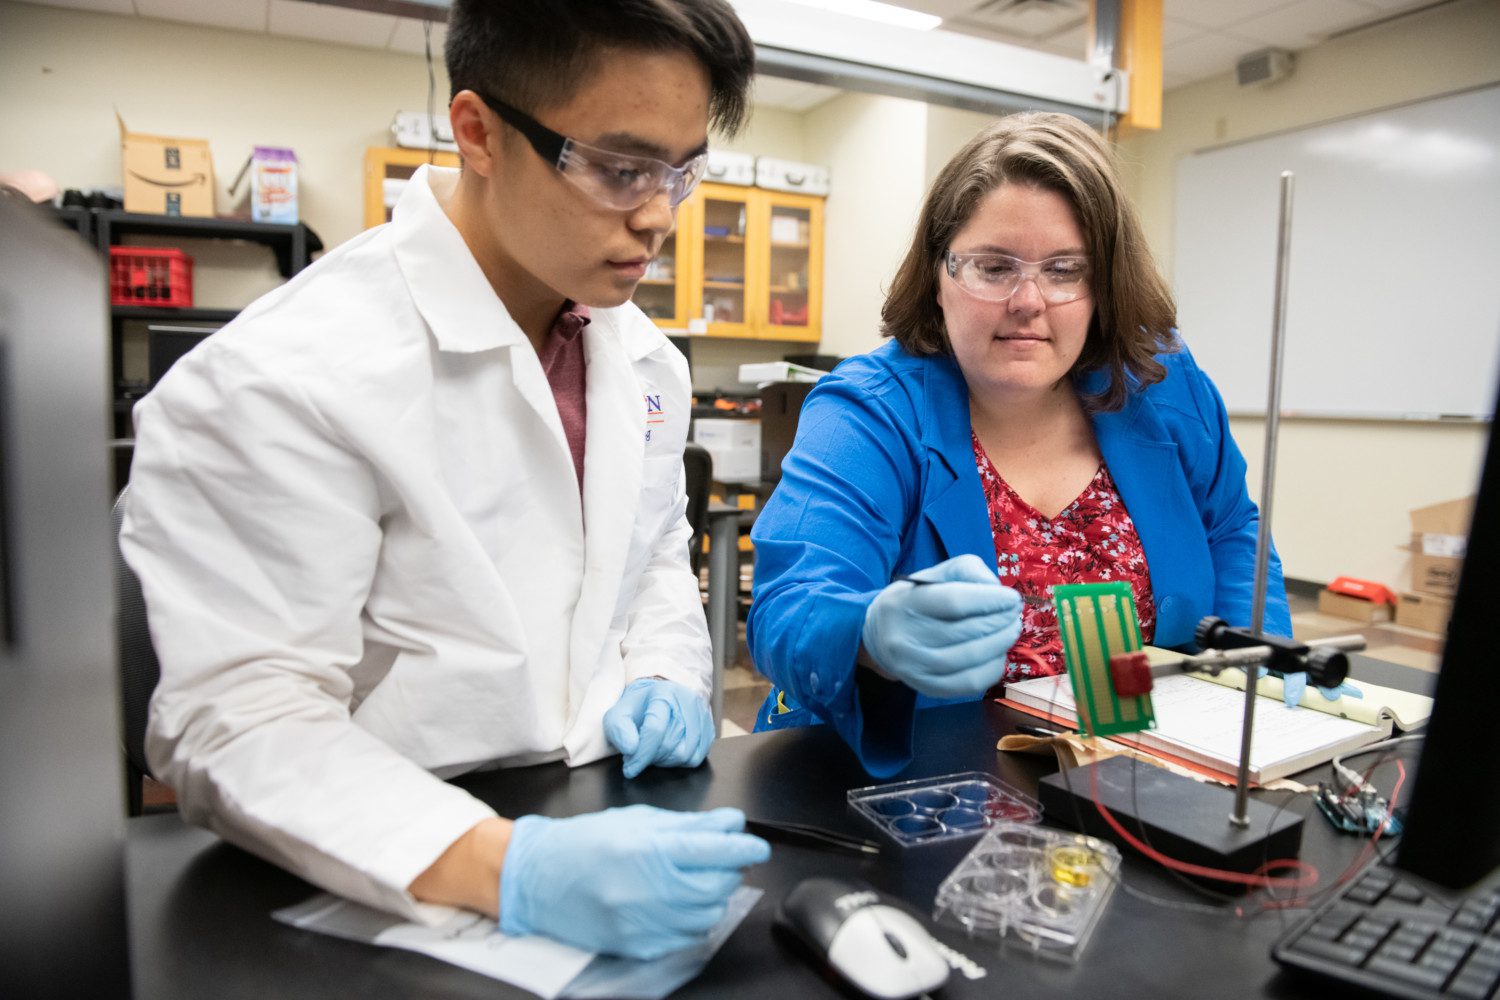 Melissa McCullough, right, works with rising senior Quan Lee on a urinalysis device she is developing as part of her Ph.D. studies.